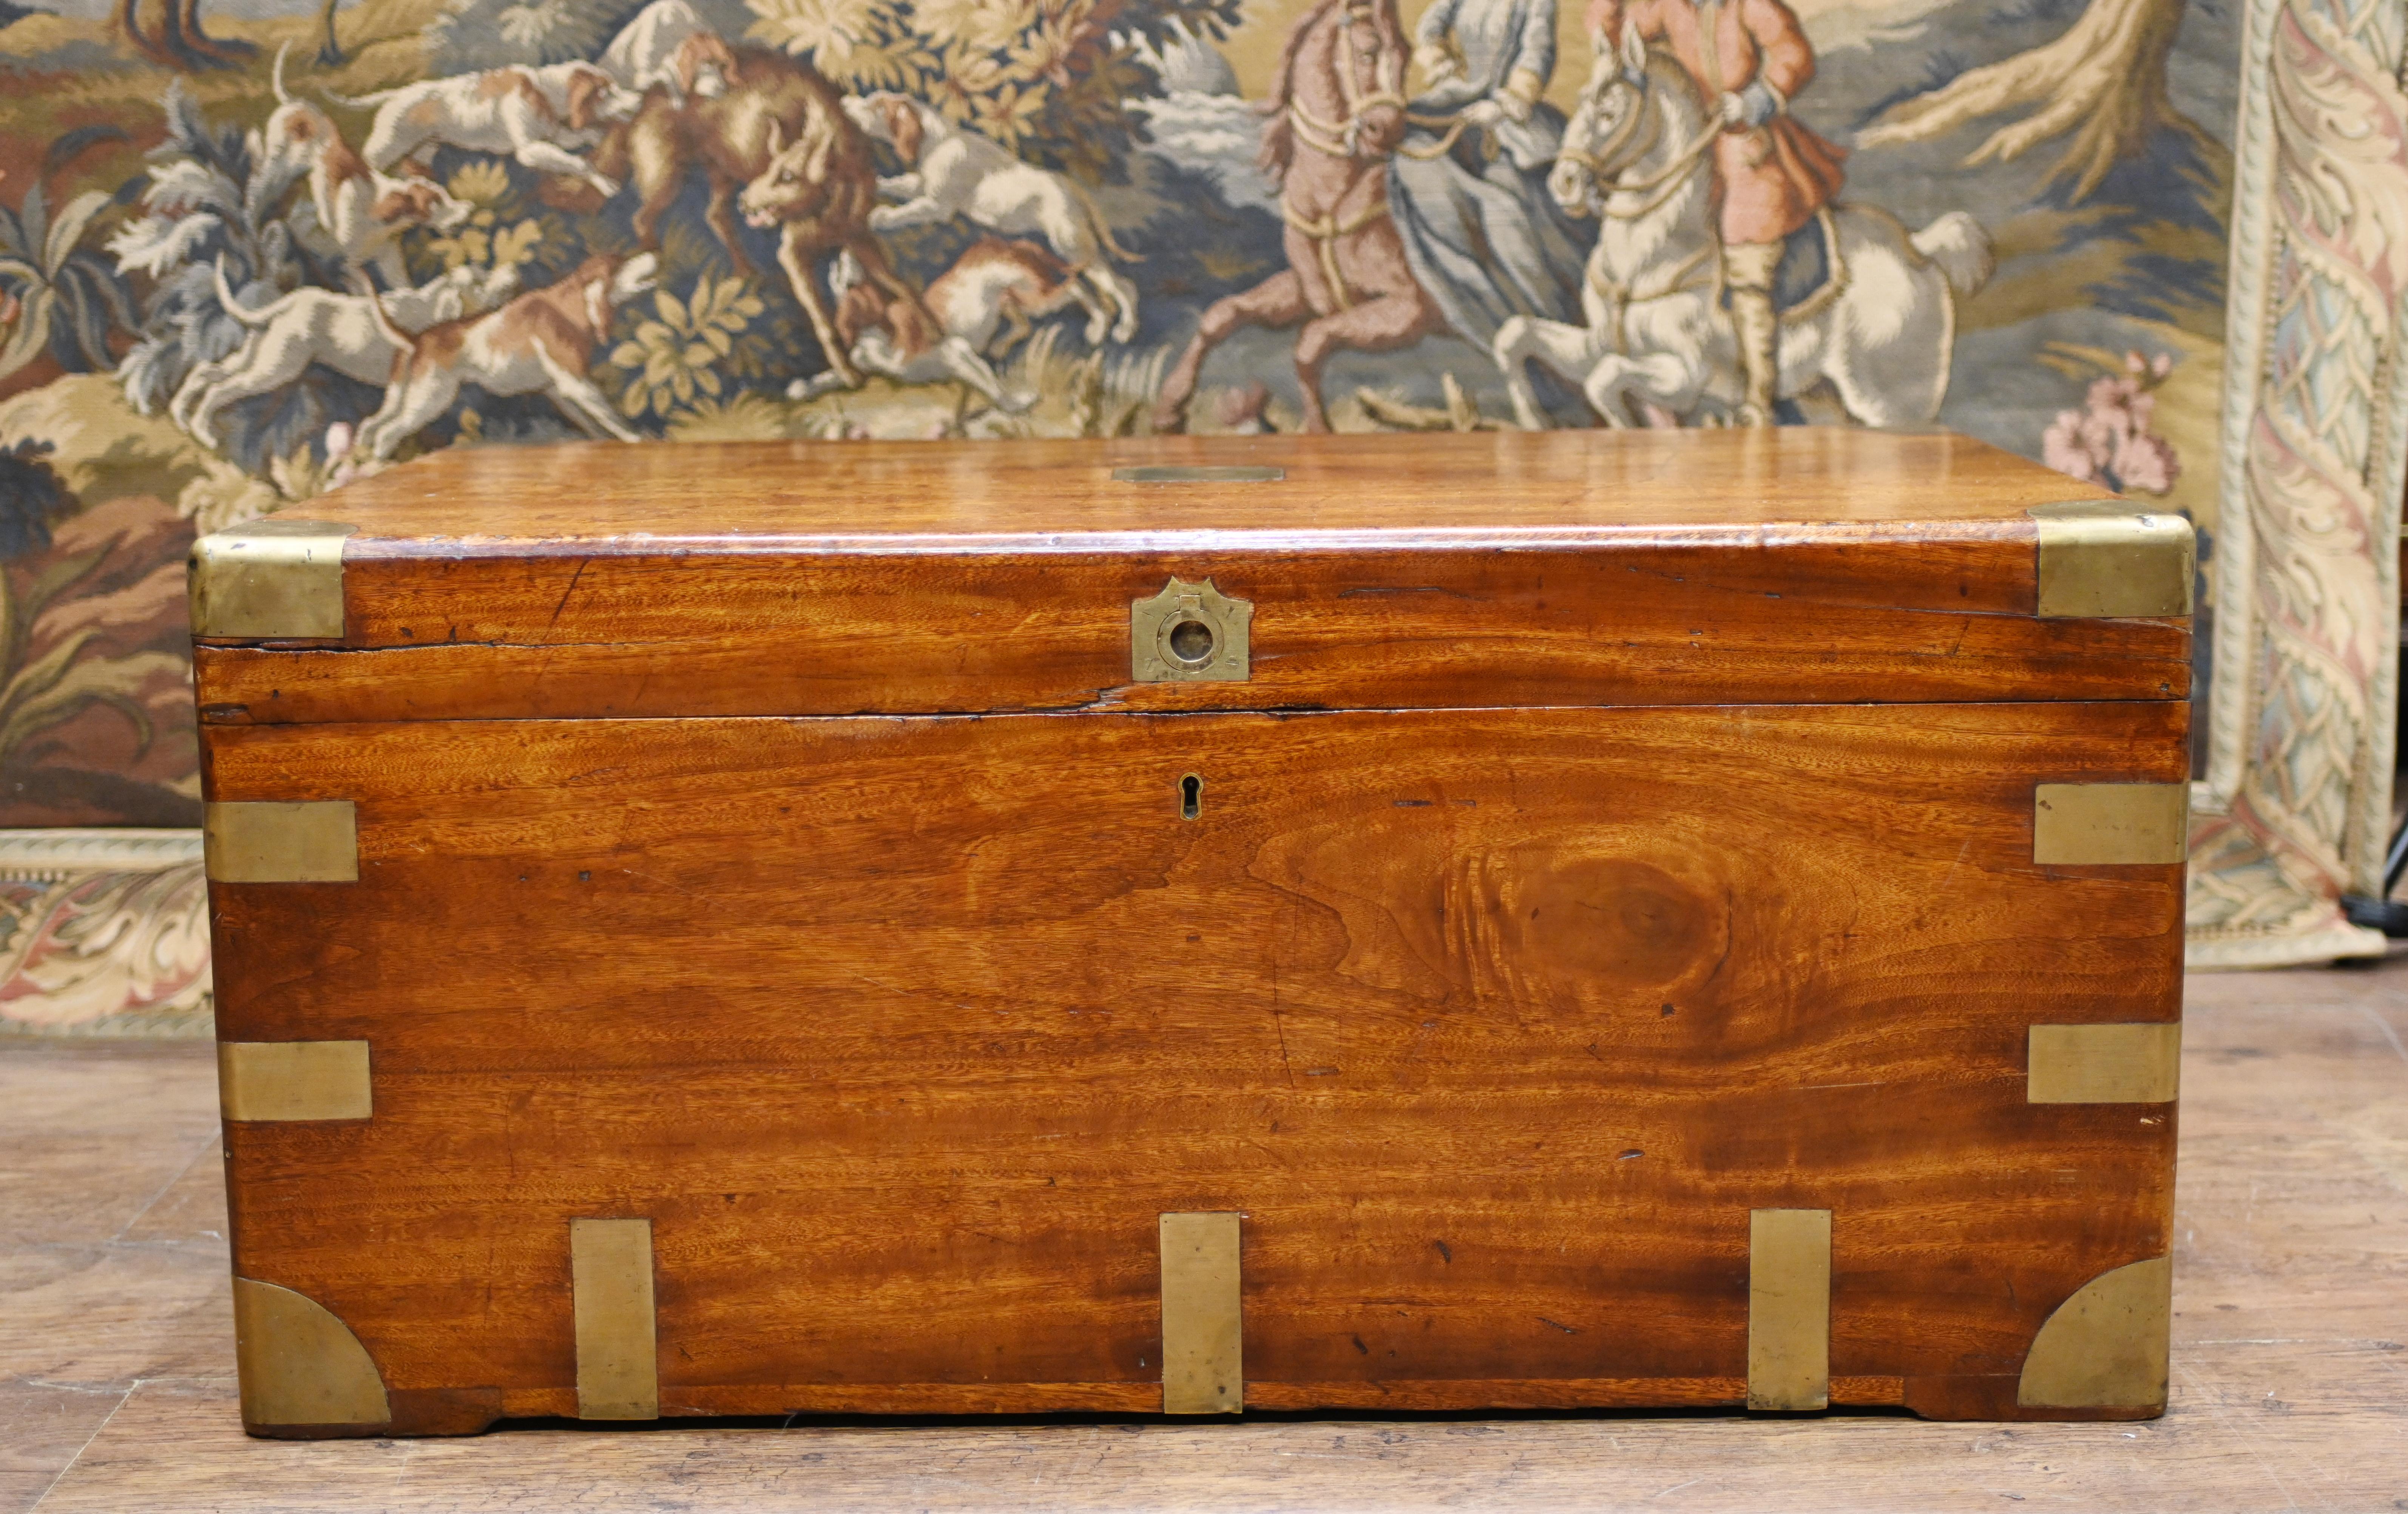 Very cool antique campaign chest in camphor
Features the campaign trademark motif of brass protectors on the corners
Would make for a great coffee table
Lovely patina to the wood and we date this antique to circa 1880
Bought from a dealer on Marche